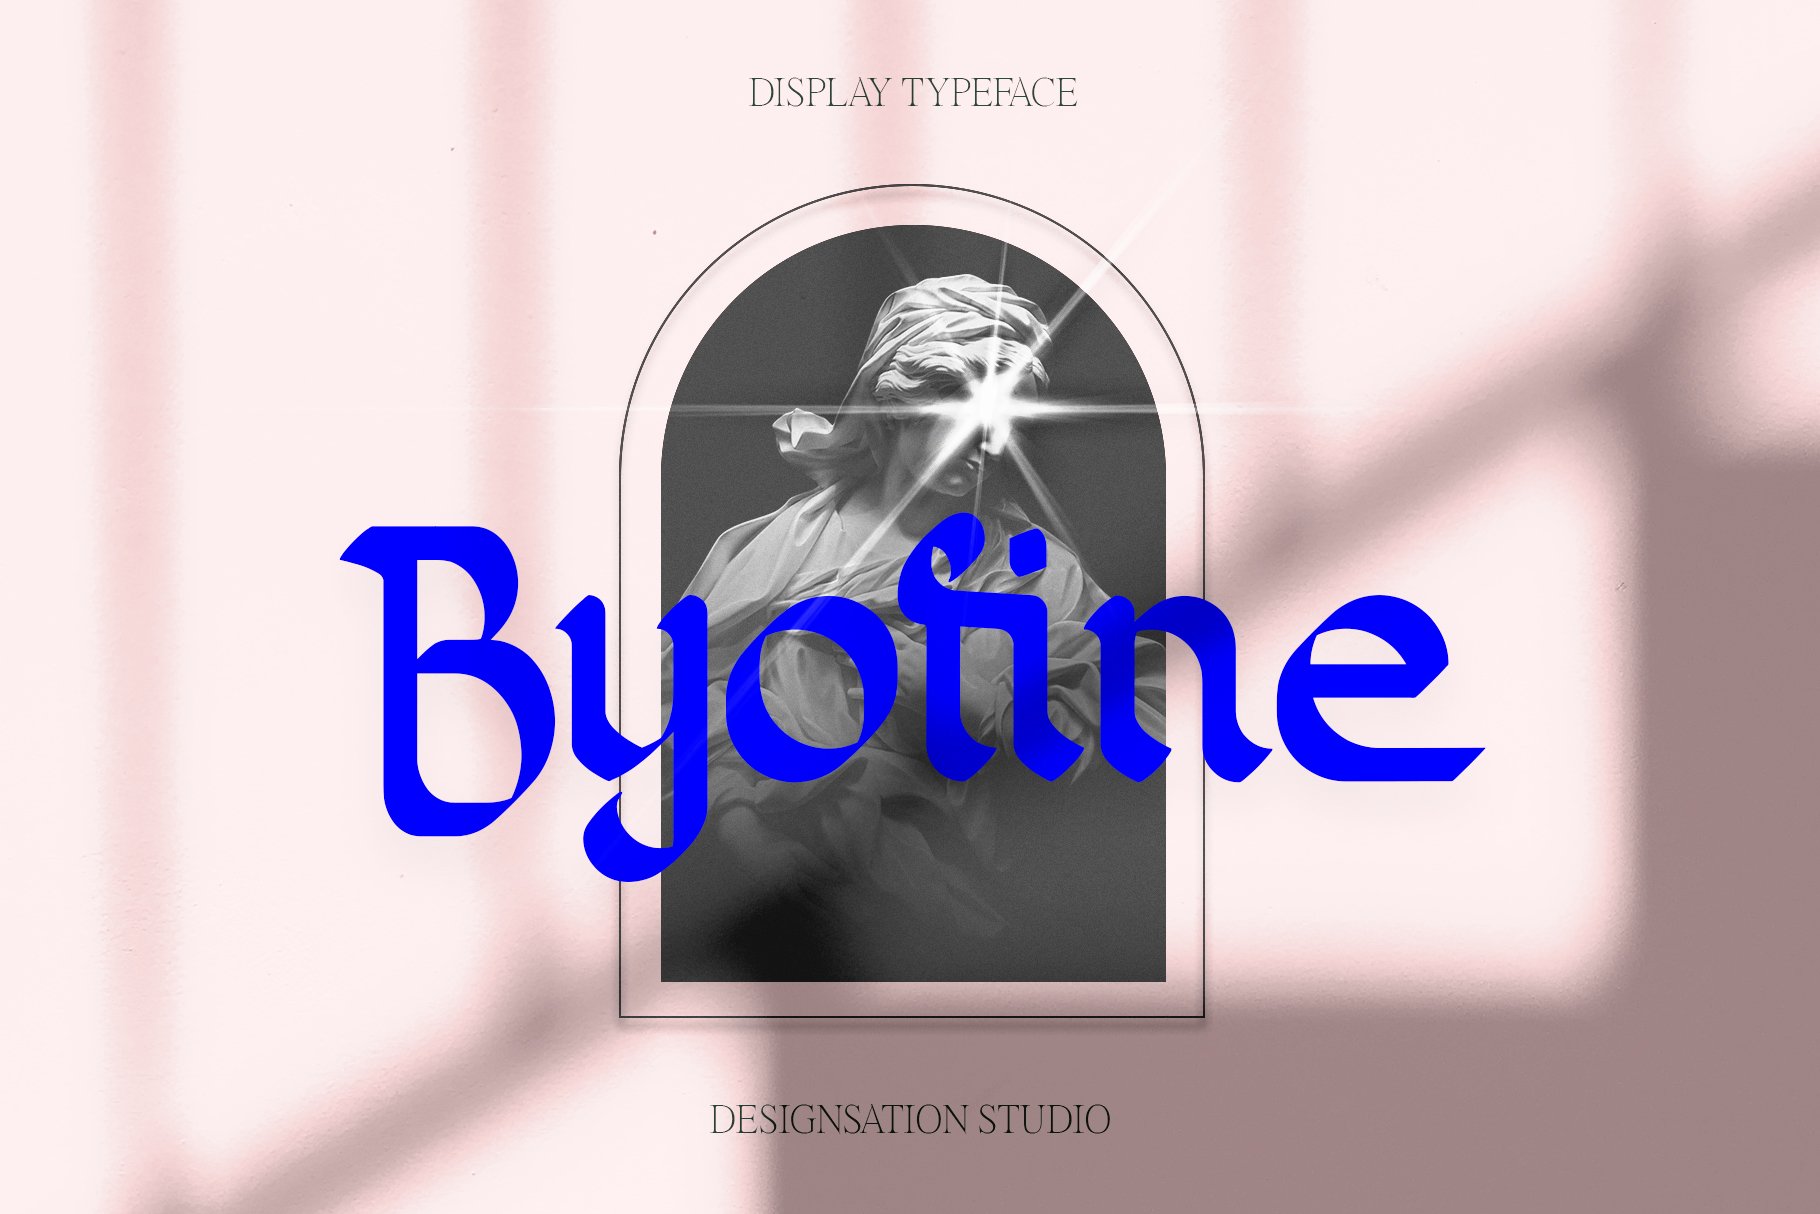 Byofine Gothic Display Typeface cover image.